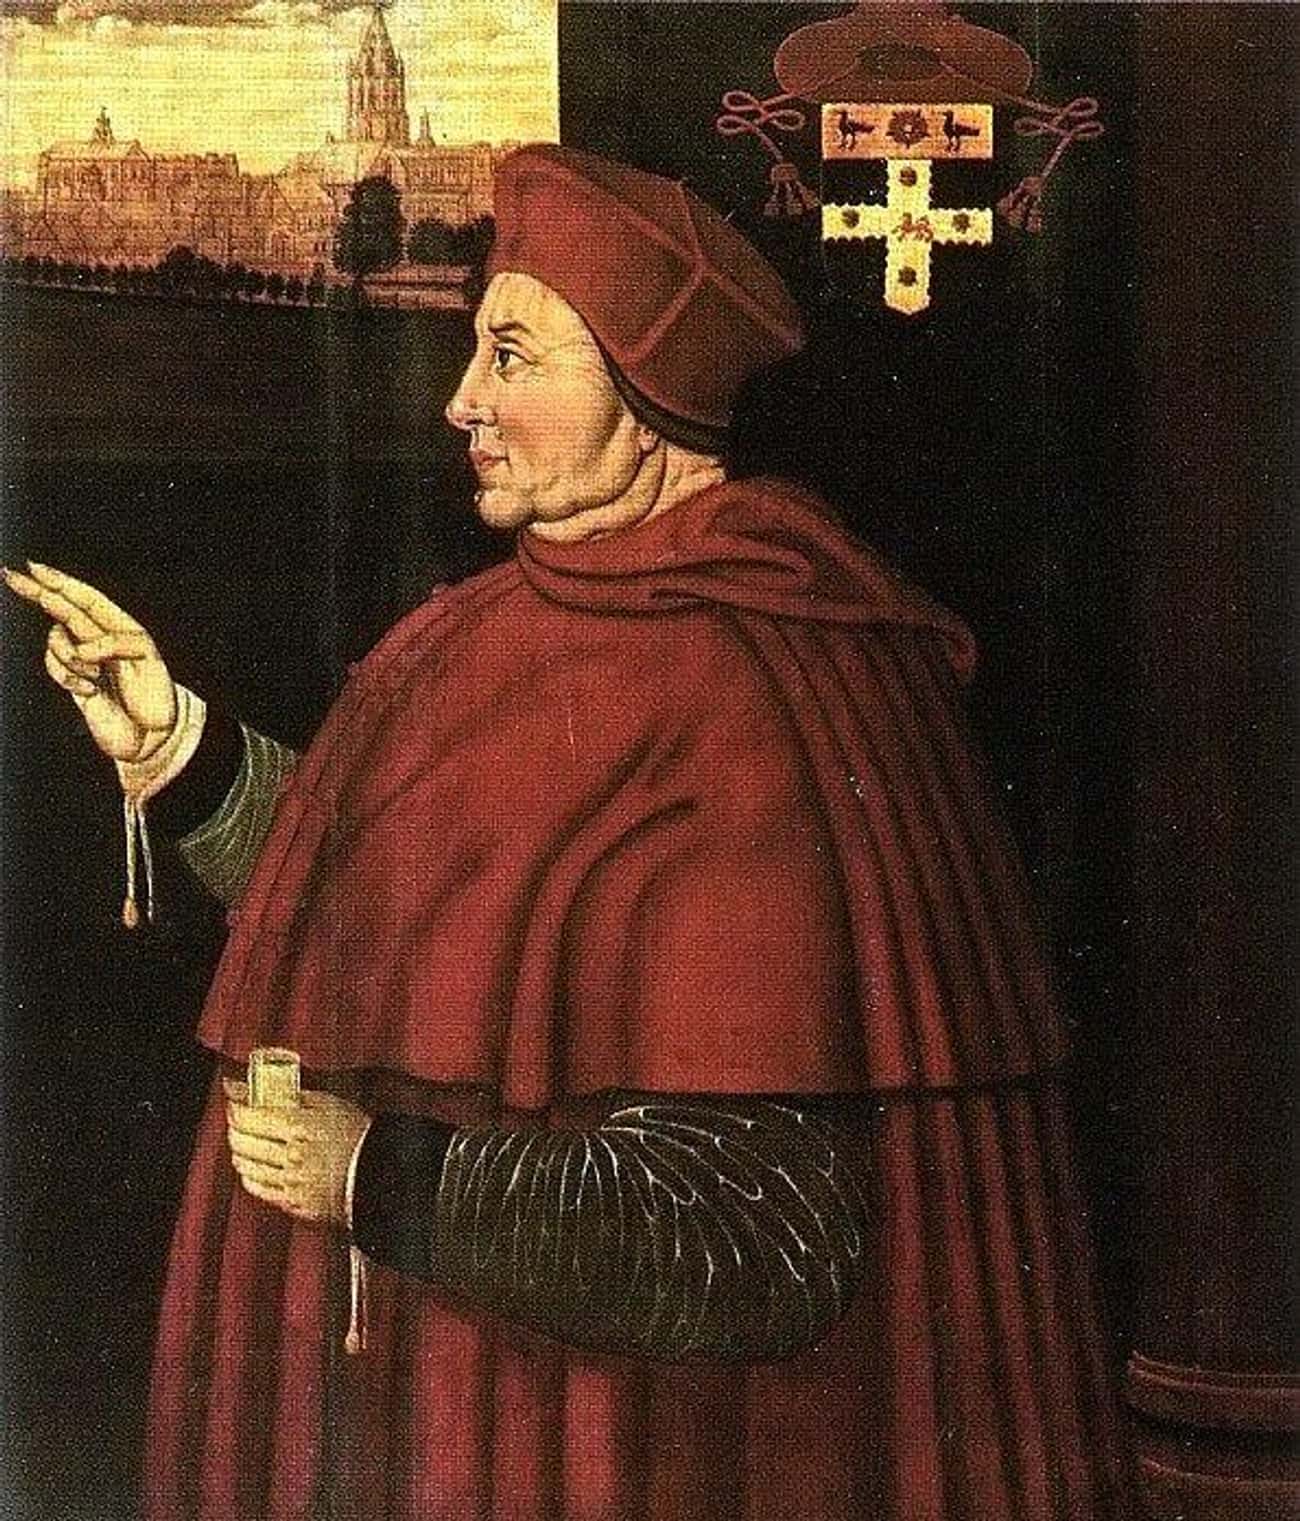 Thomas Wolsey Died Before His Likely Execution